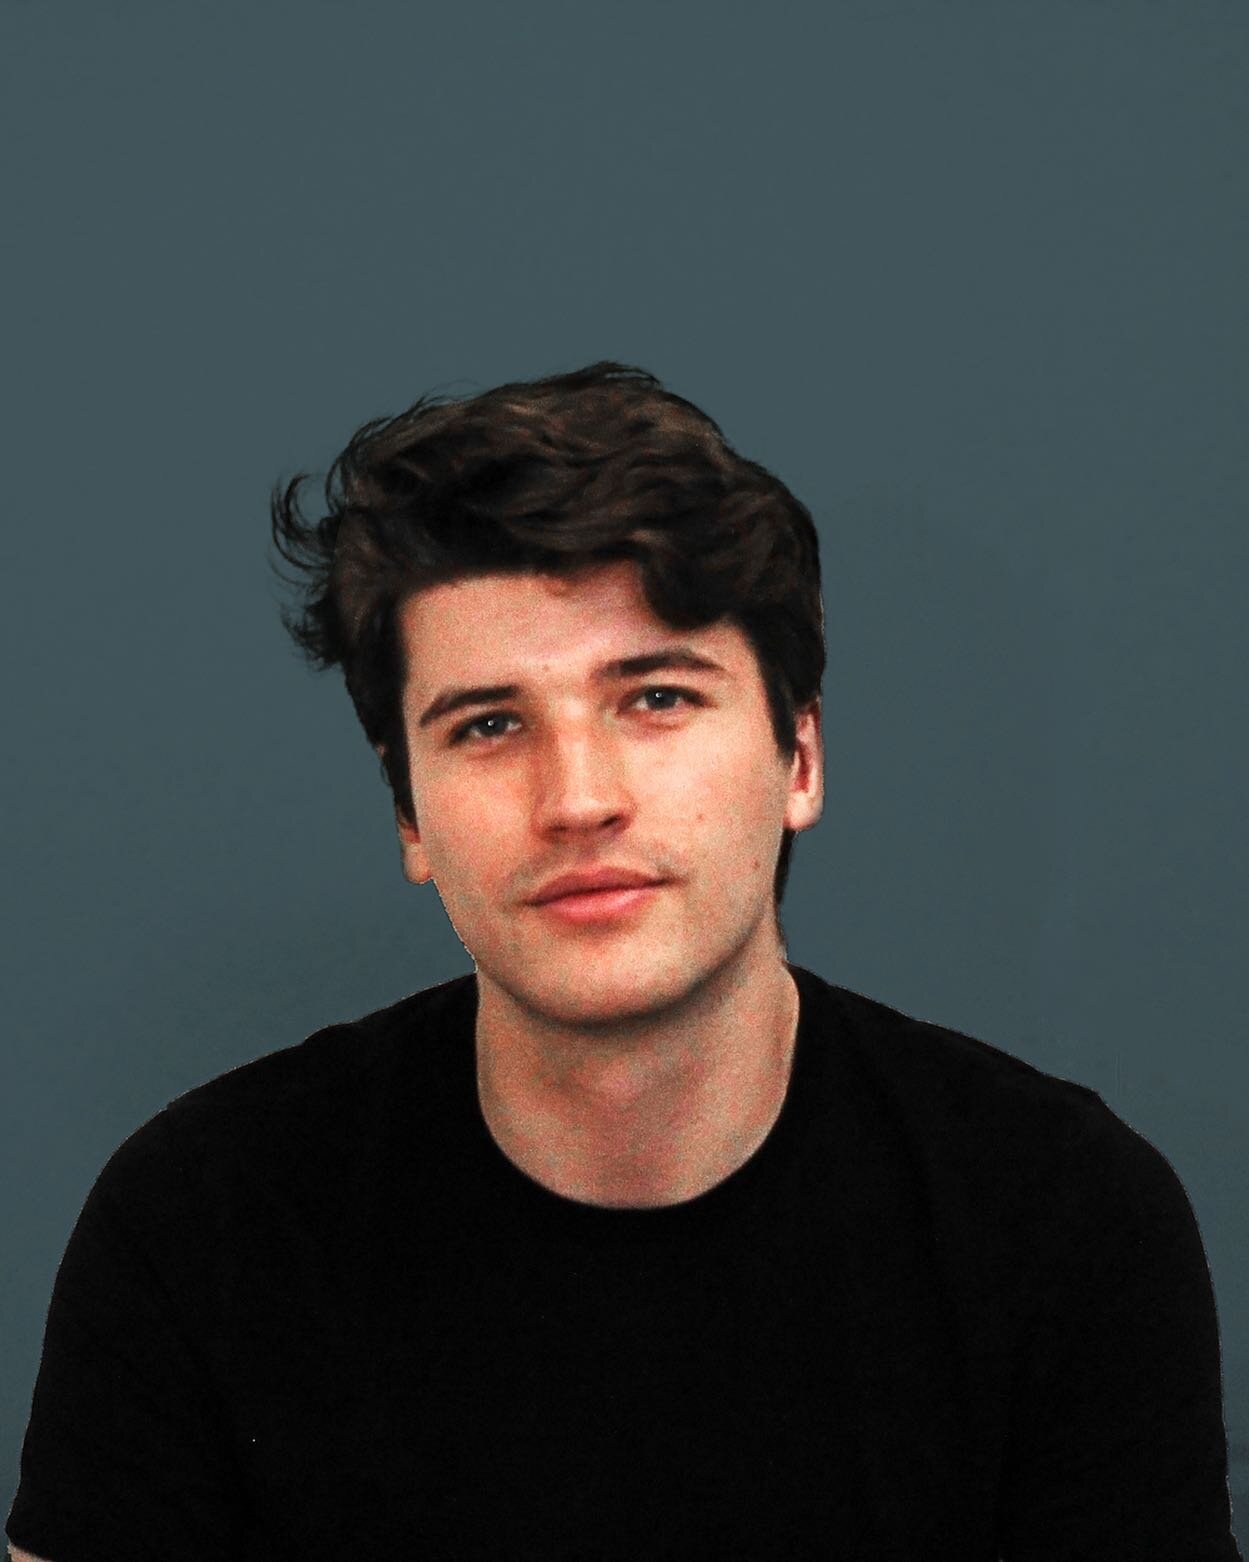 Today, we're joined by the one, the only...Jack Johnston! @jackjohnston.design is a fellow industrial designer and Offsite Spring 2021 alumni who is constantly fascinated by complex problems, ones that require research and creativity to answer. Jack 